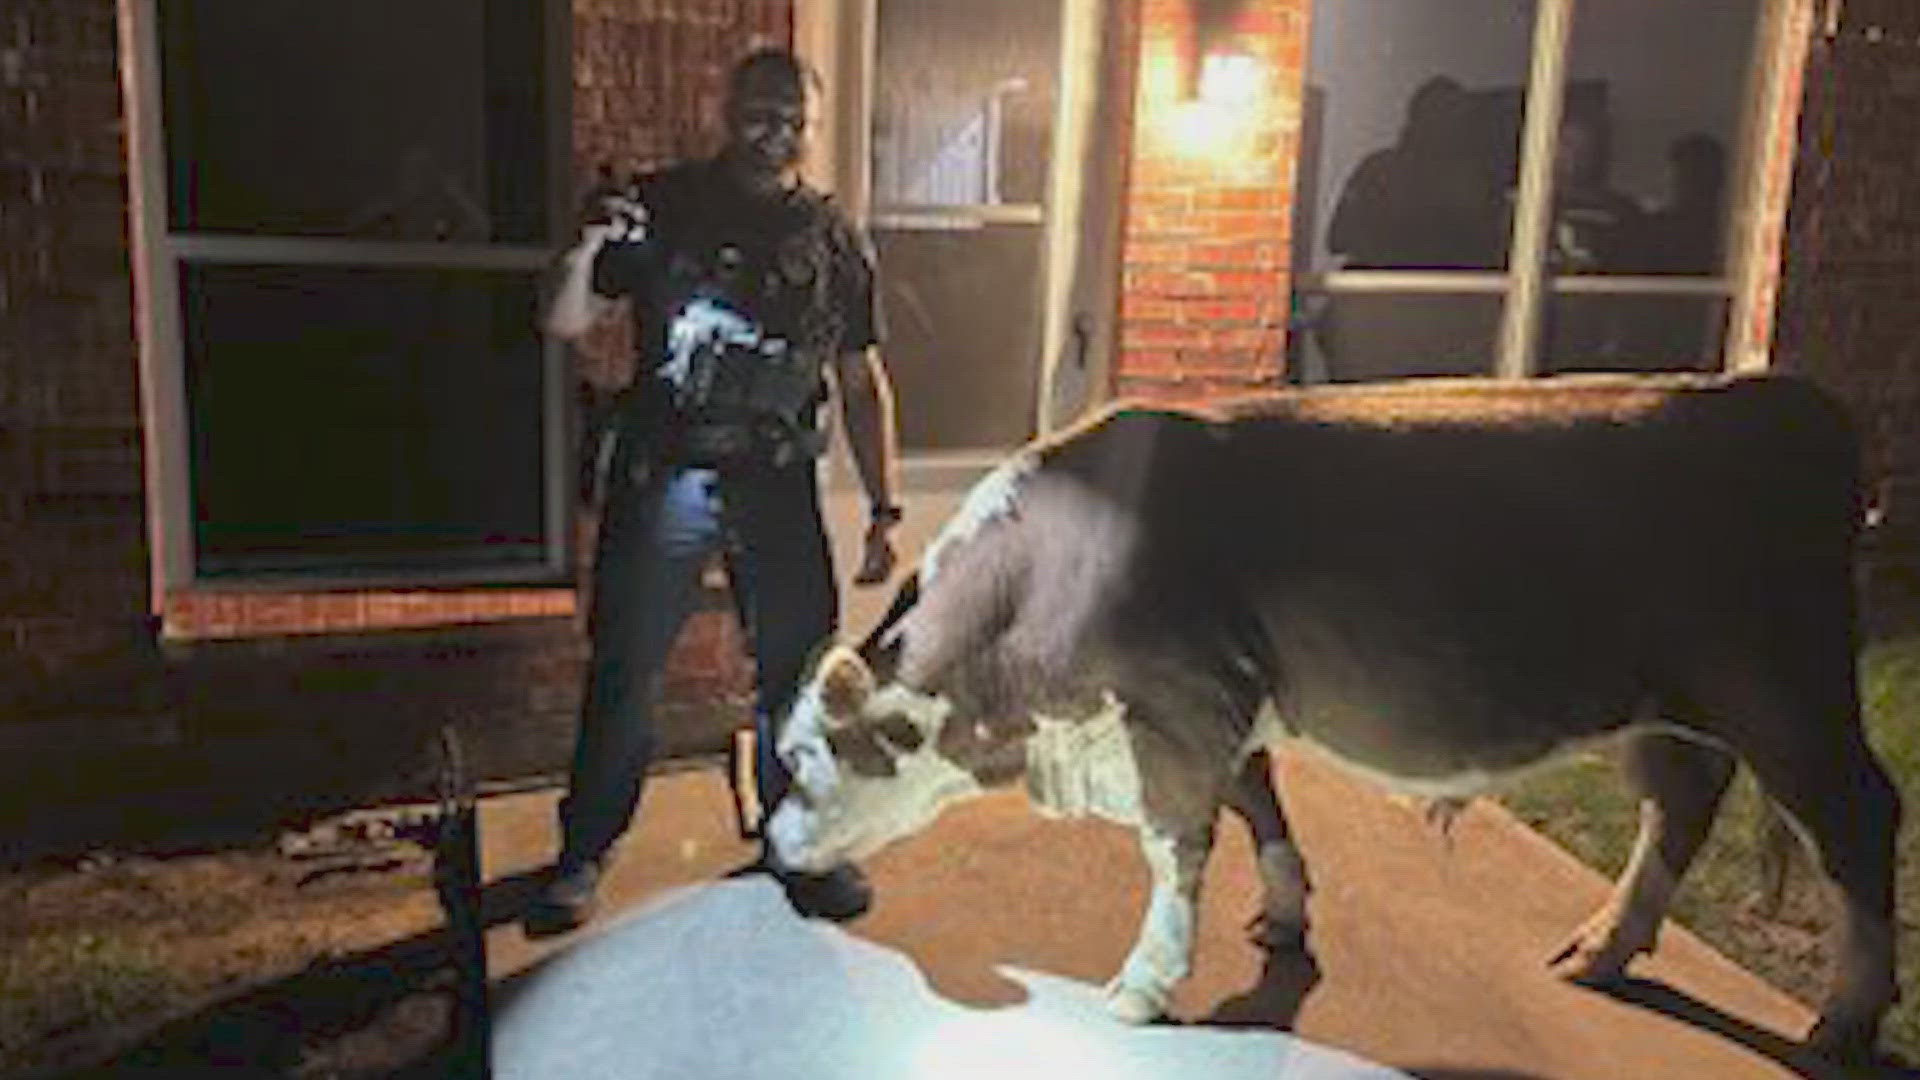 Mansfield police took the bull safely back to its pasture. It and another bull wander up to Latoya Keeling's backyard daily, where she gives them a snack.